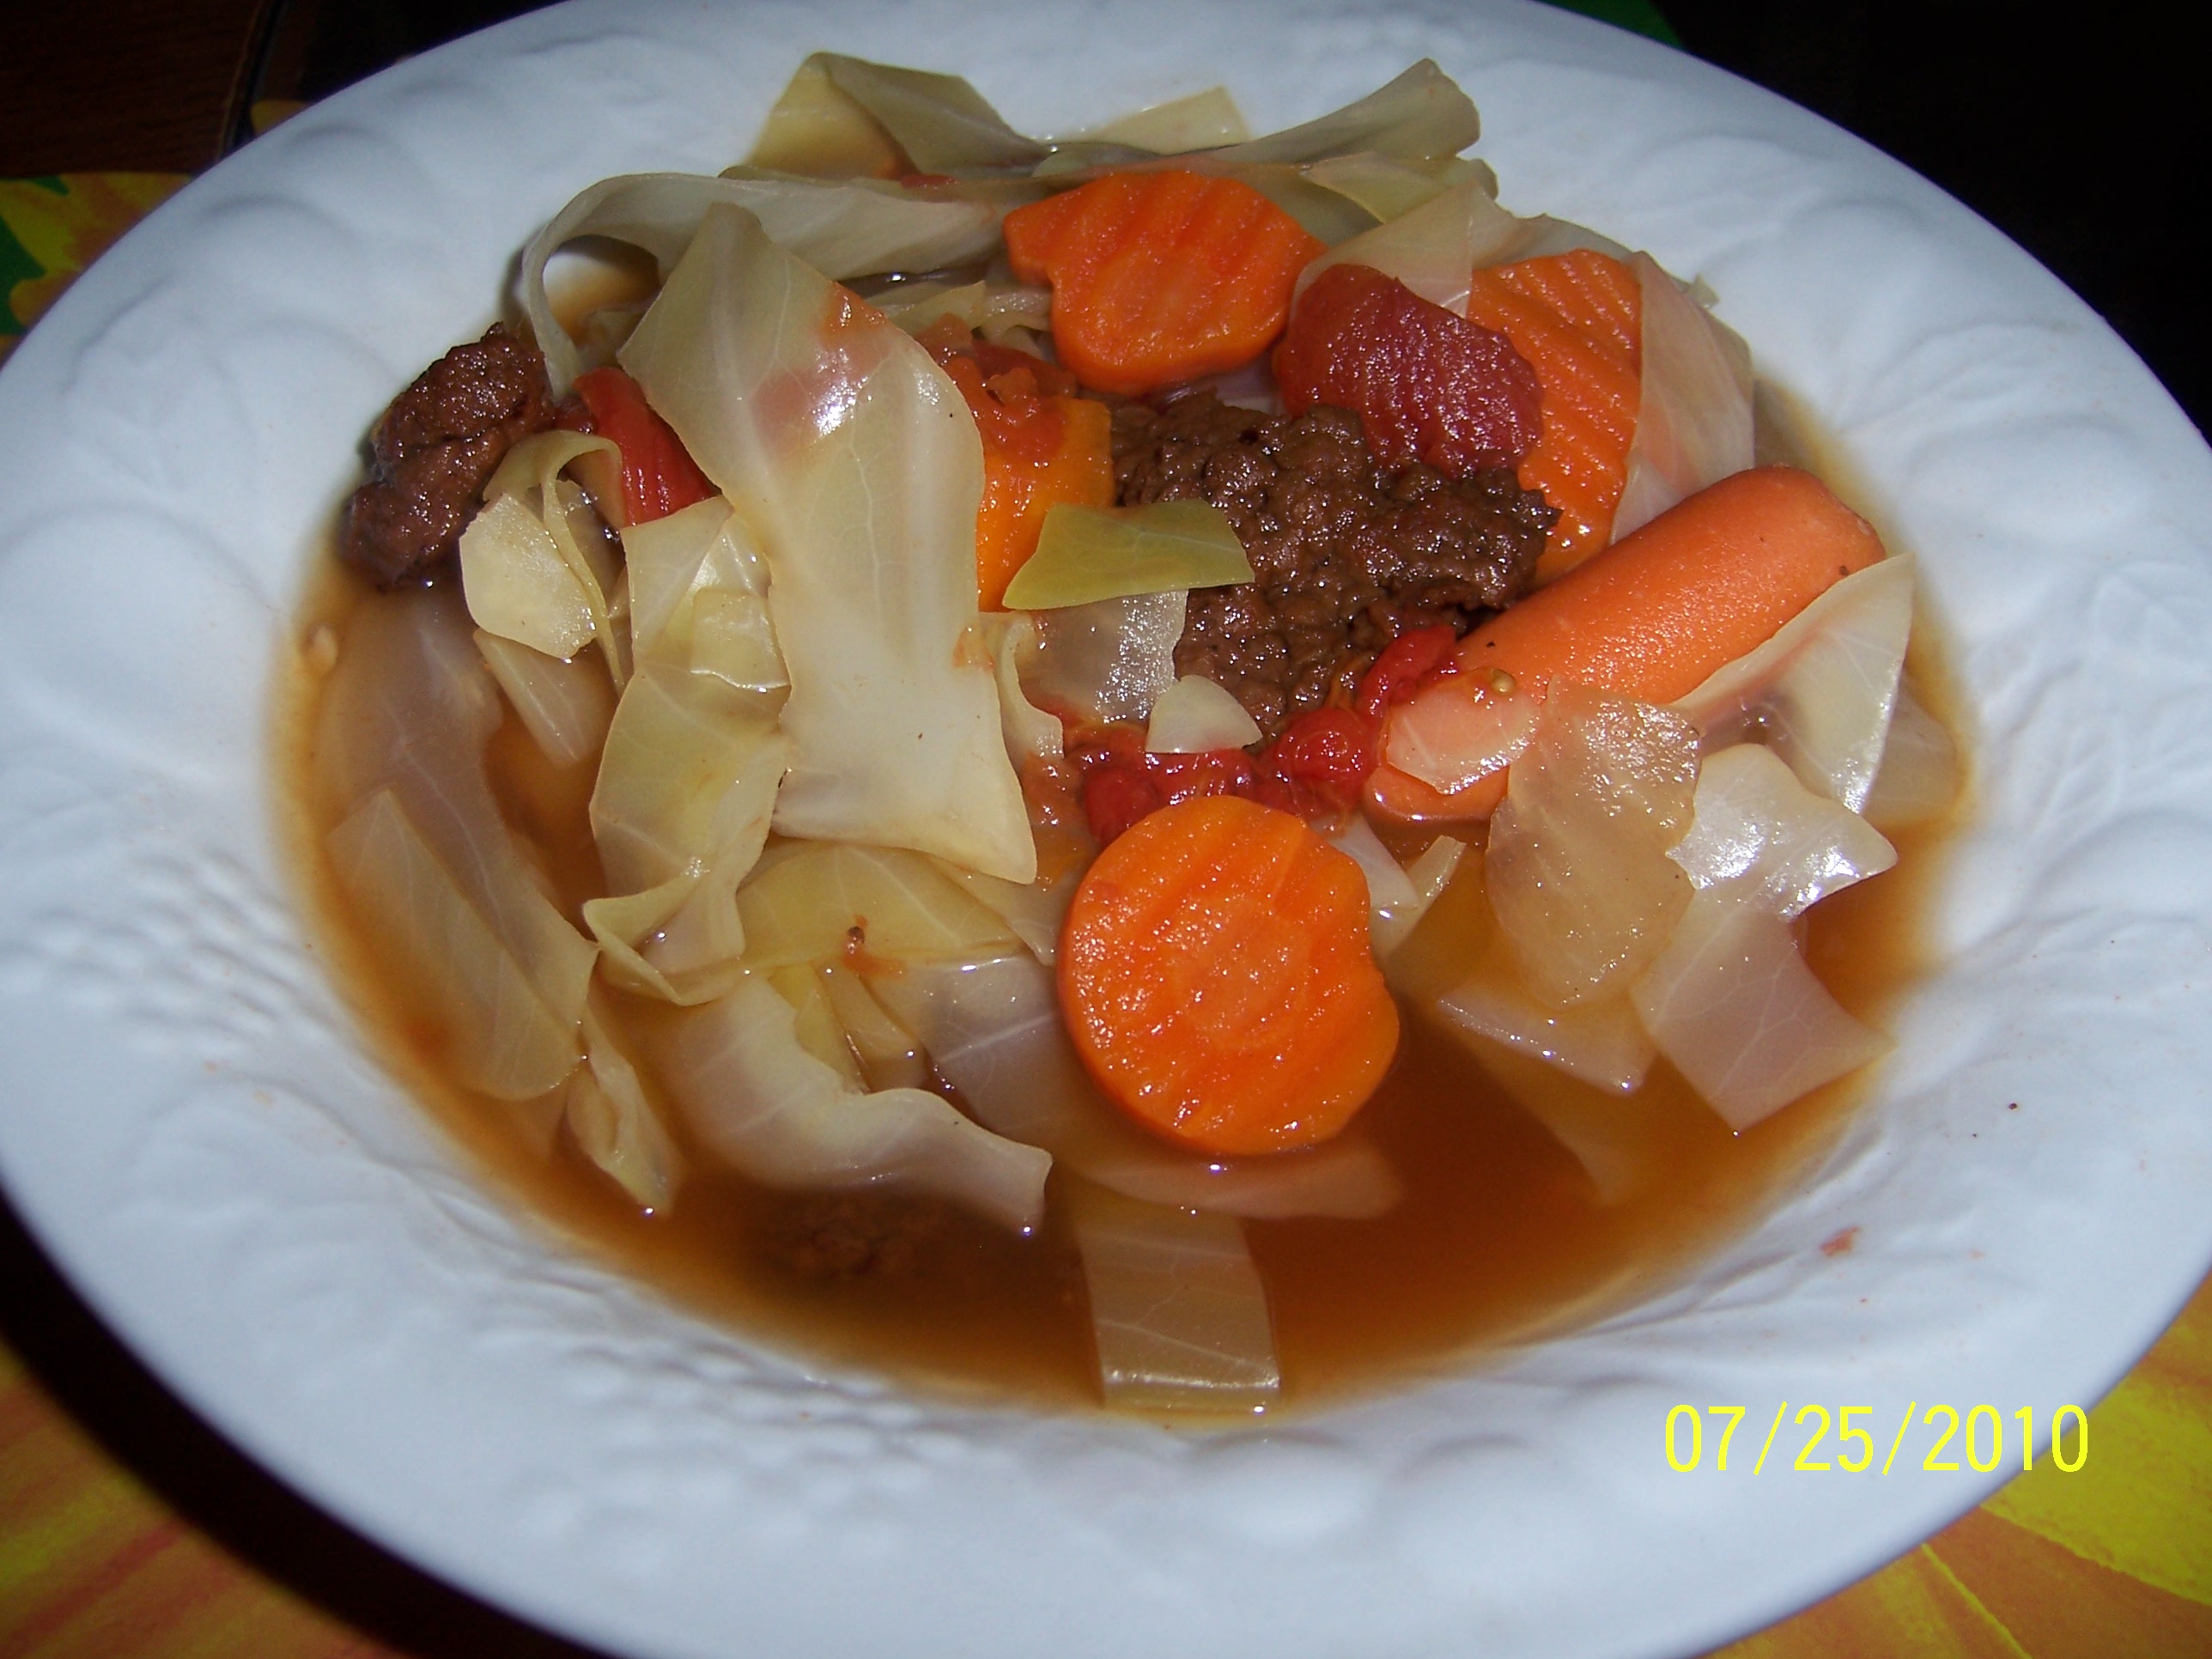 Sweet Russian Cabbage Soup 